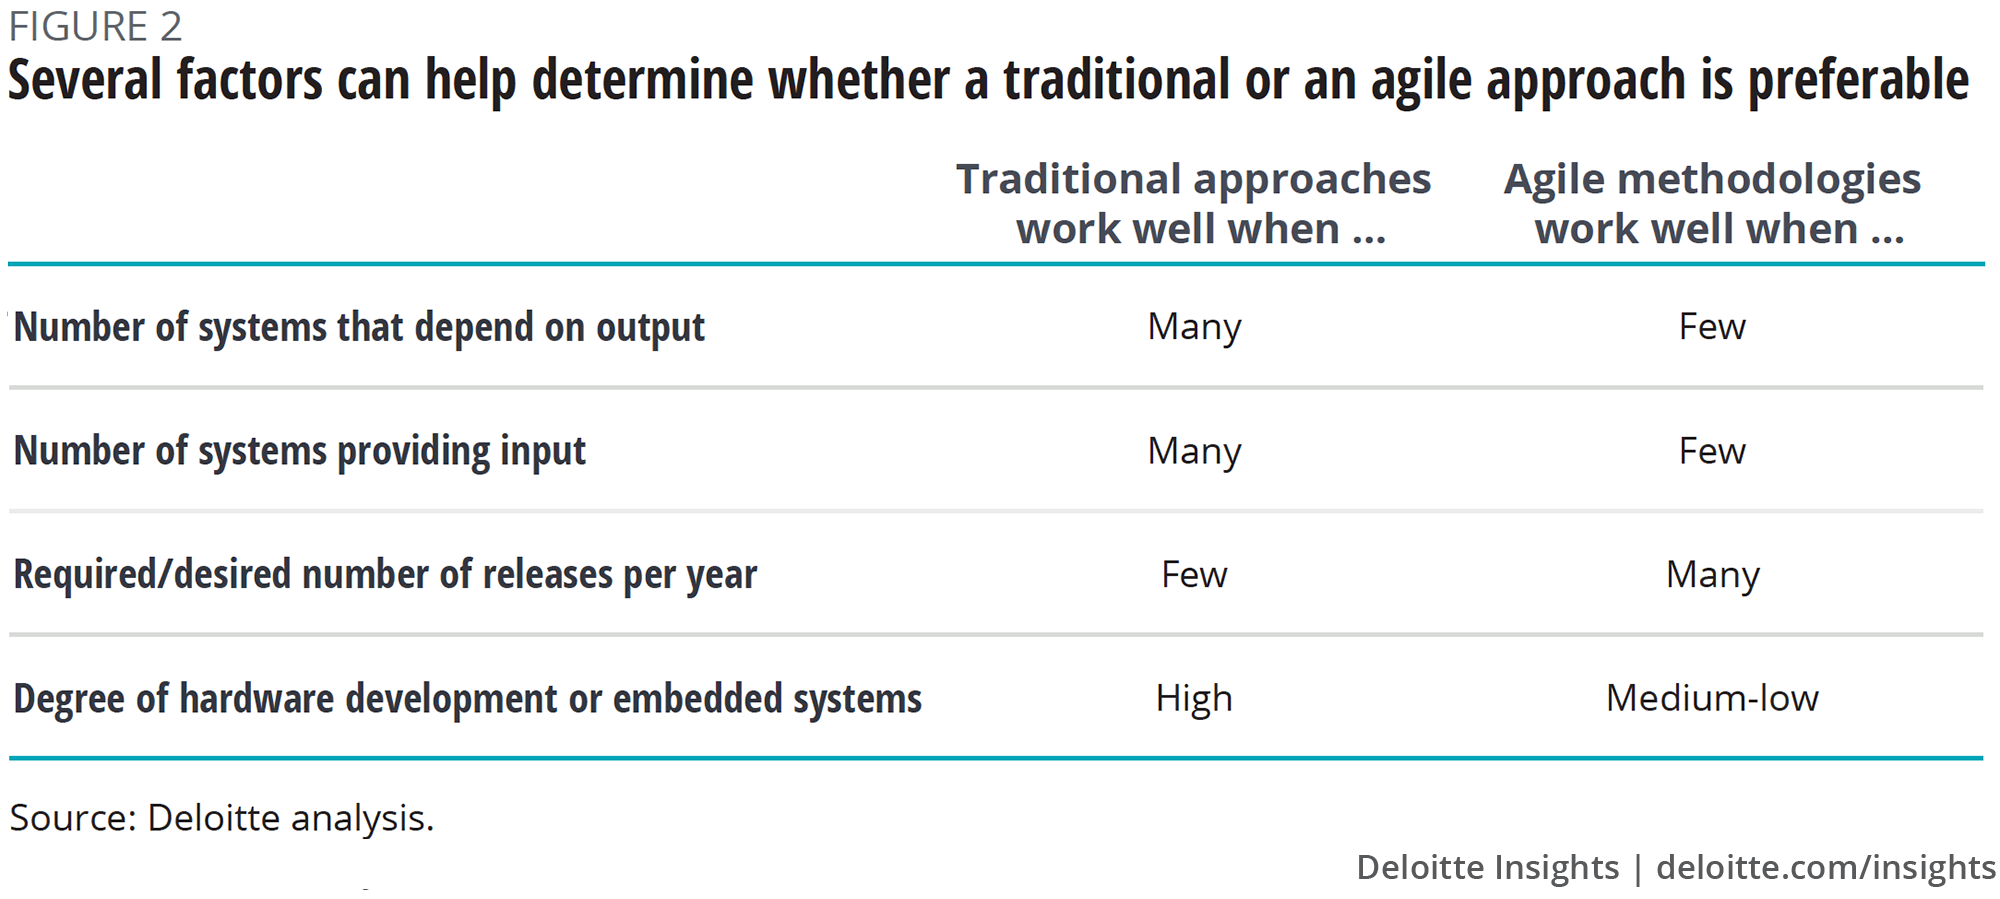 Several factors can help determine whether a traditional or an agile approach is preferable